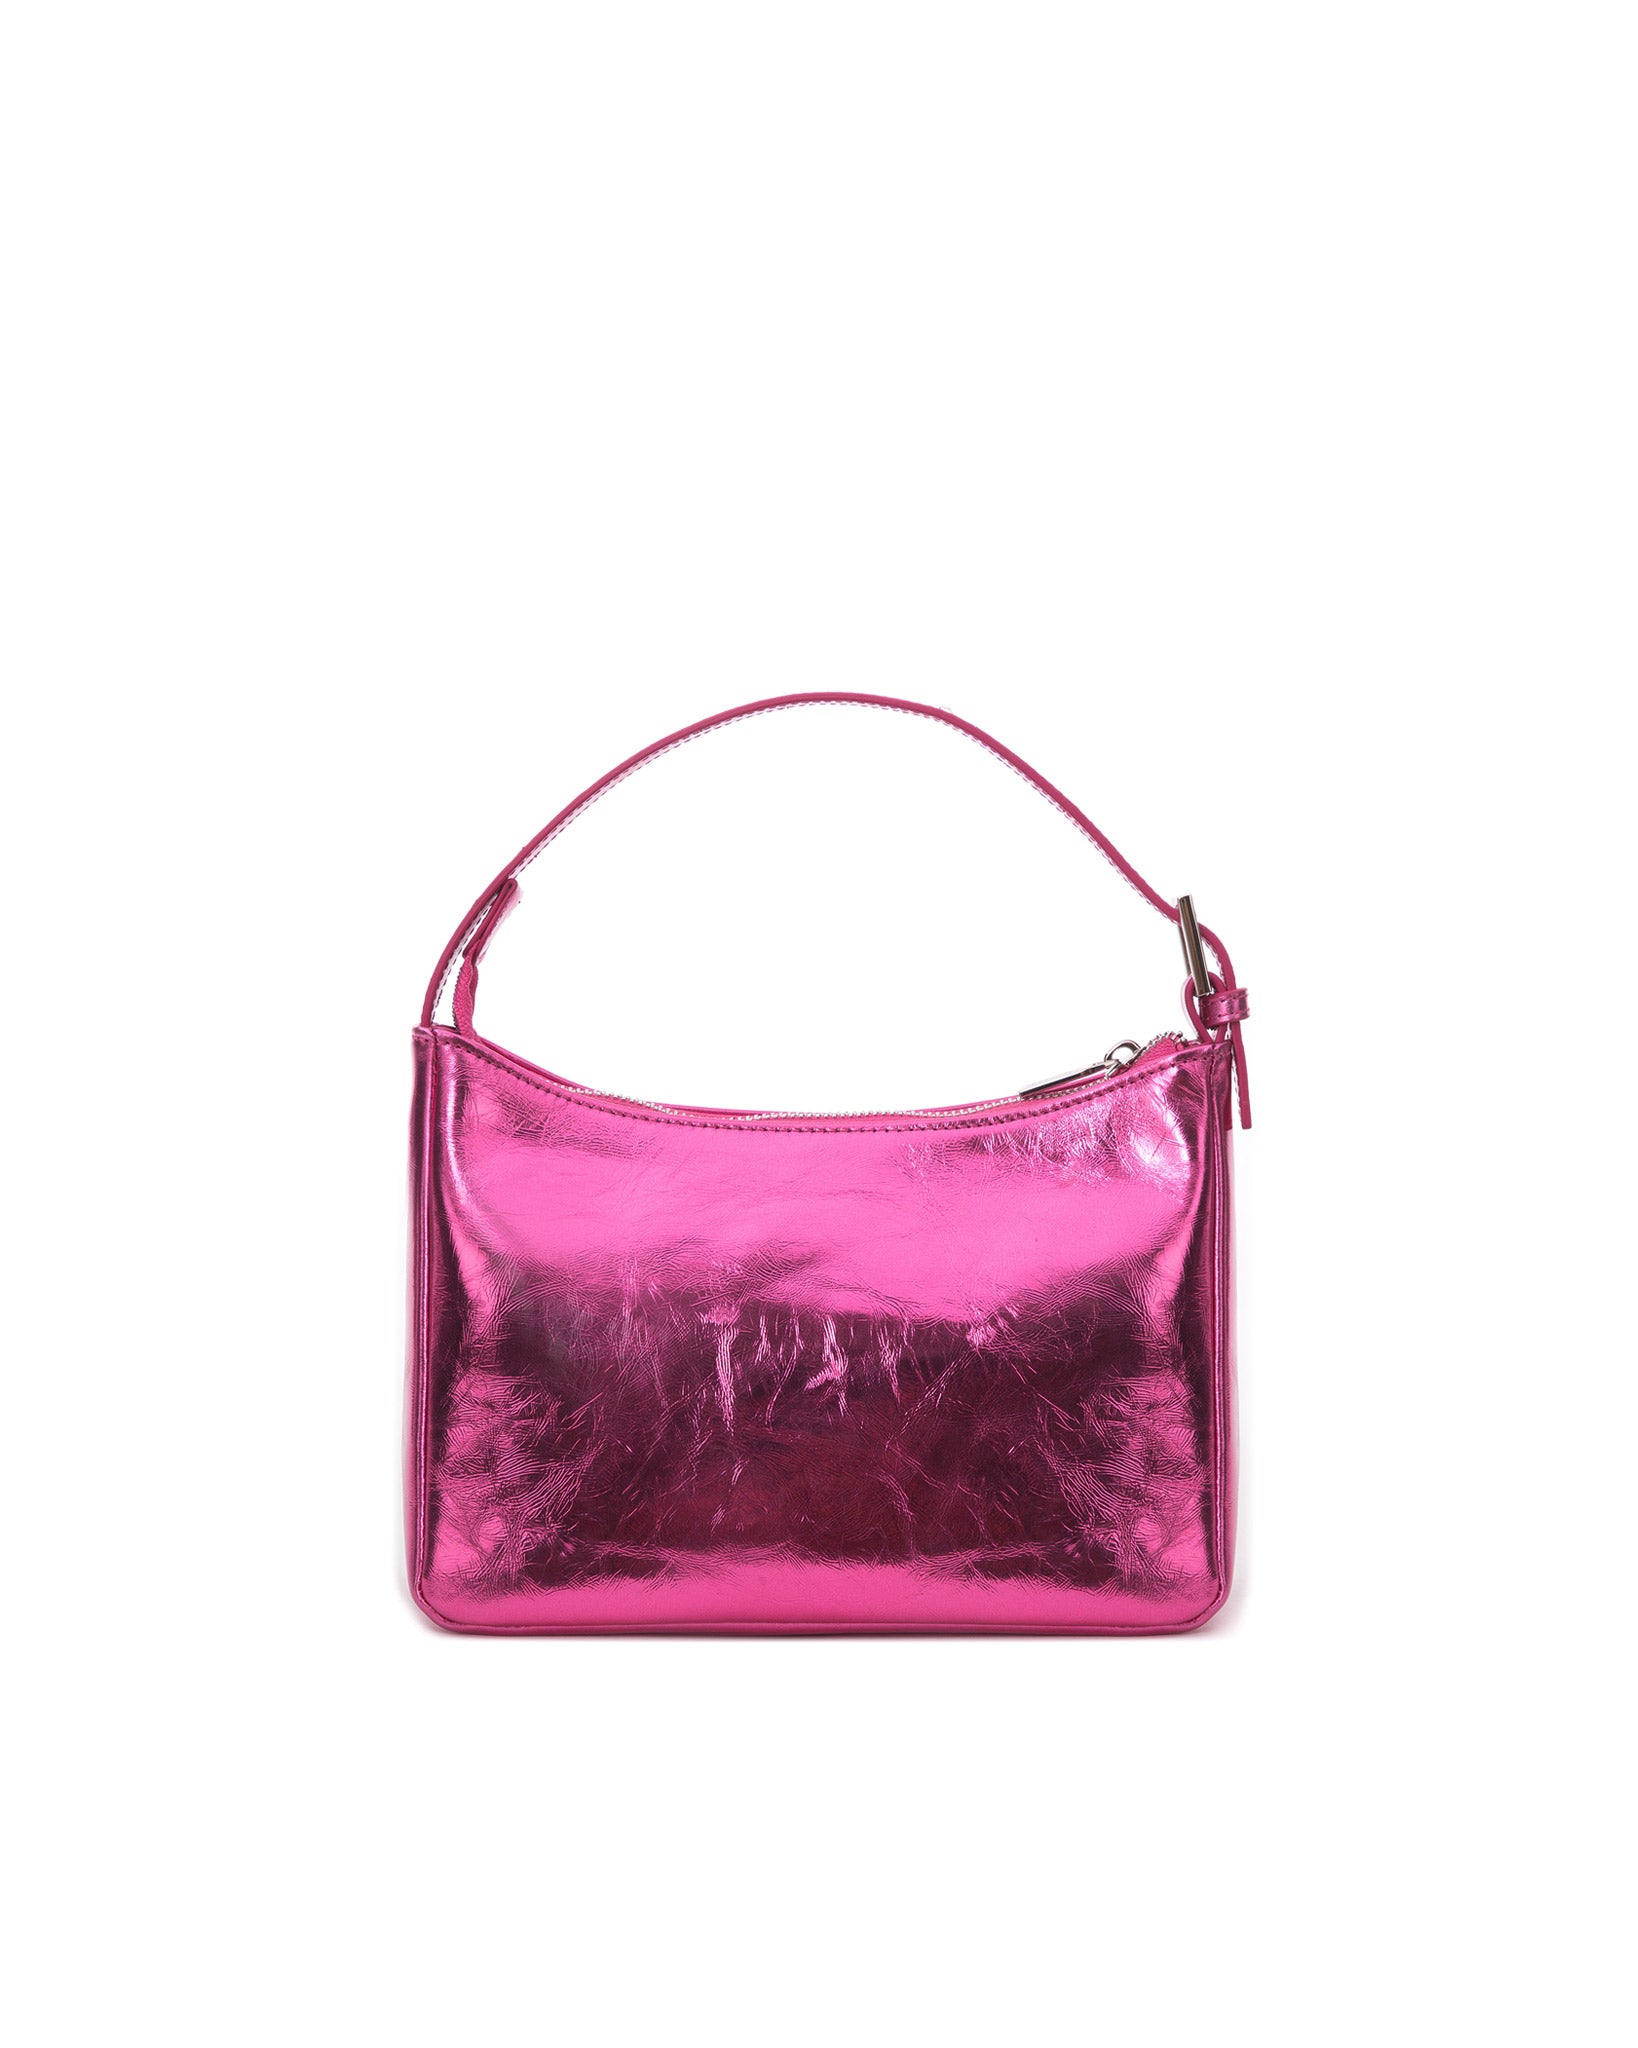 Pale Pink Purse Round Handle Patent Leather Purse